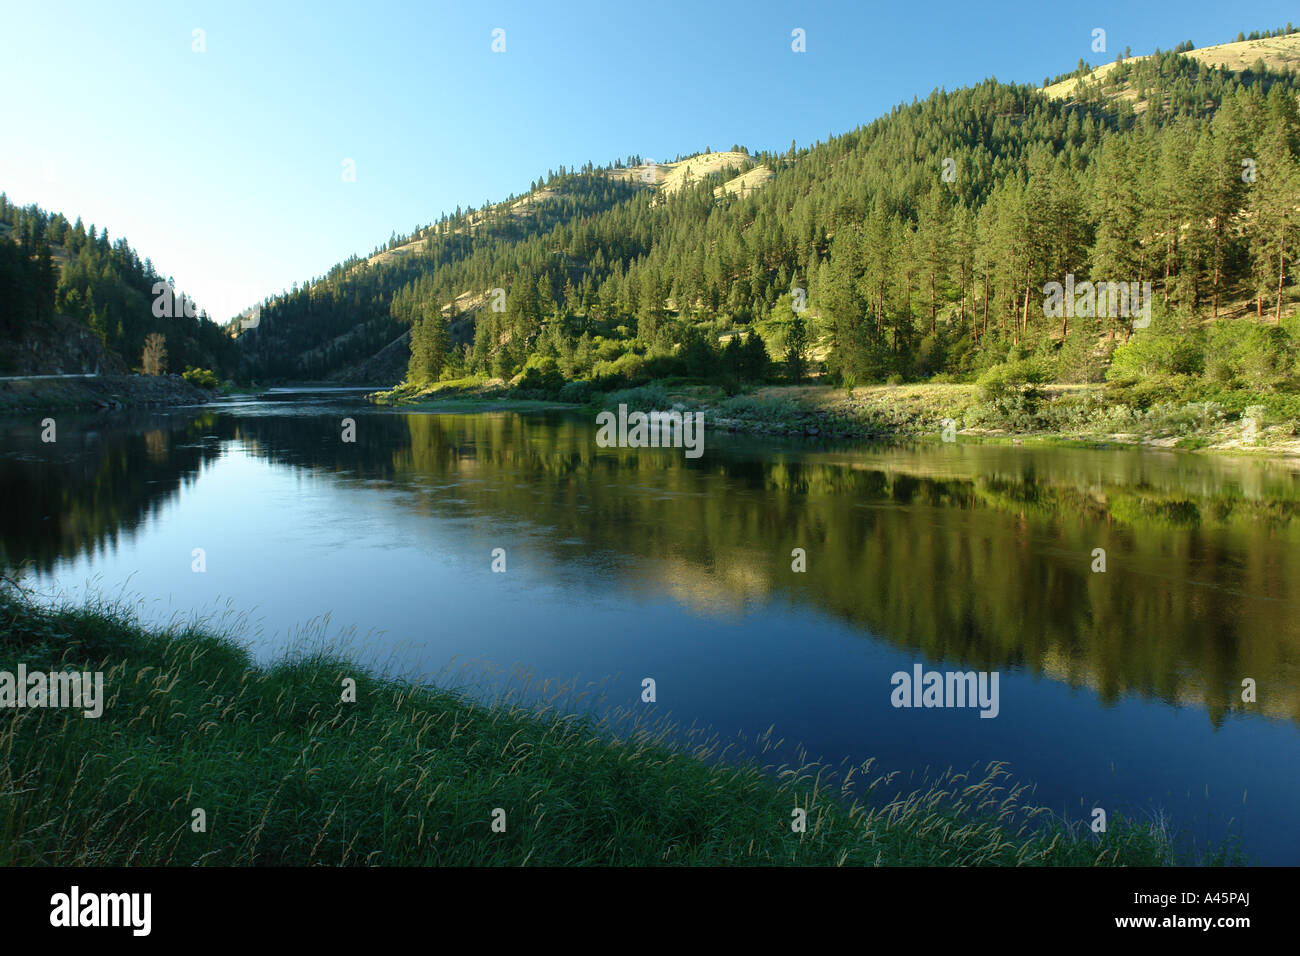 AJD56150, Ahsahka, ID, Idaho, Clearwater River, Northwest Passage National Scenic Byway, Clearwater River Canyon Stock Photo